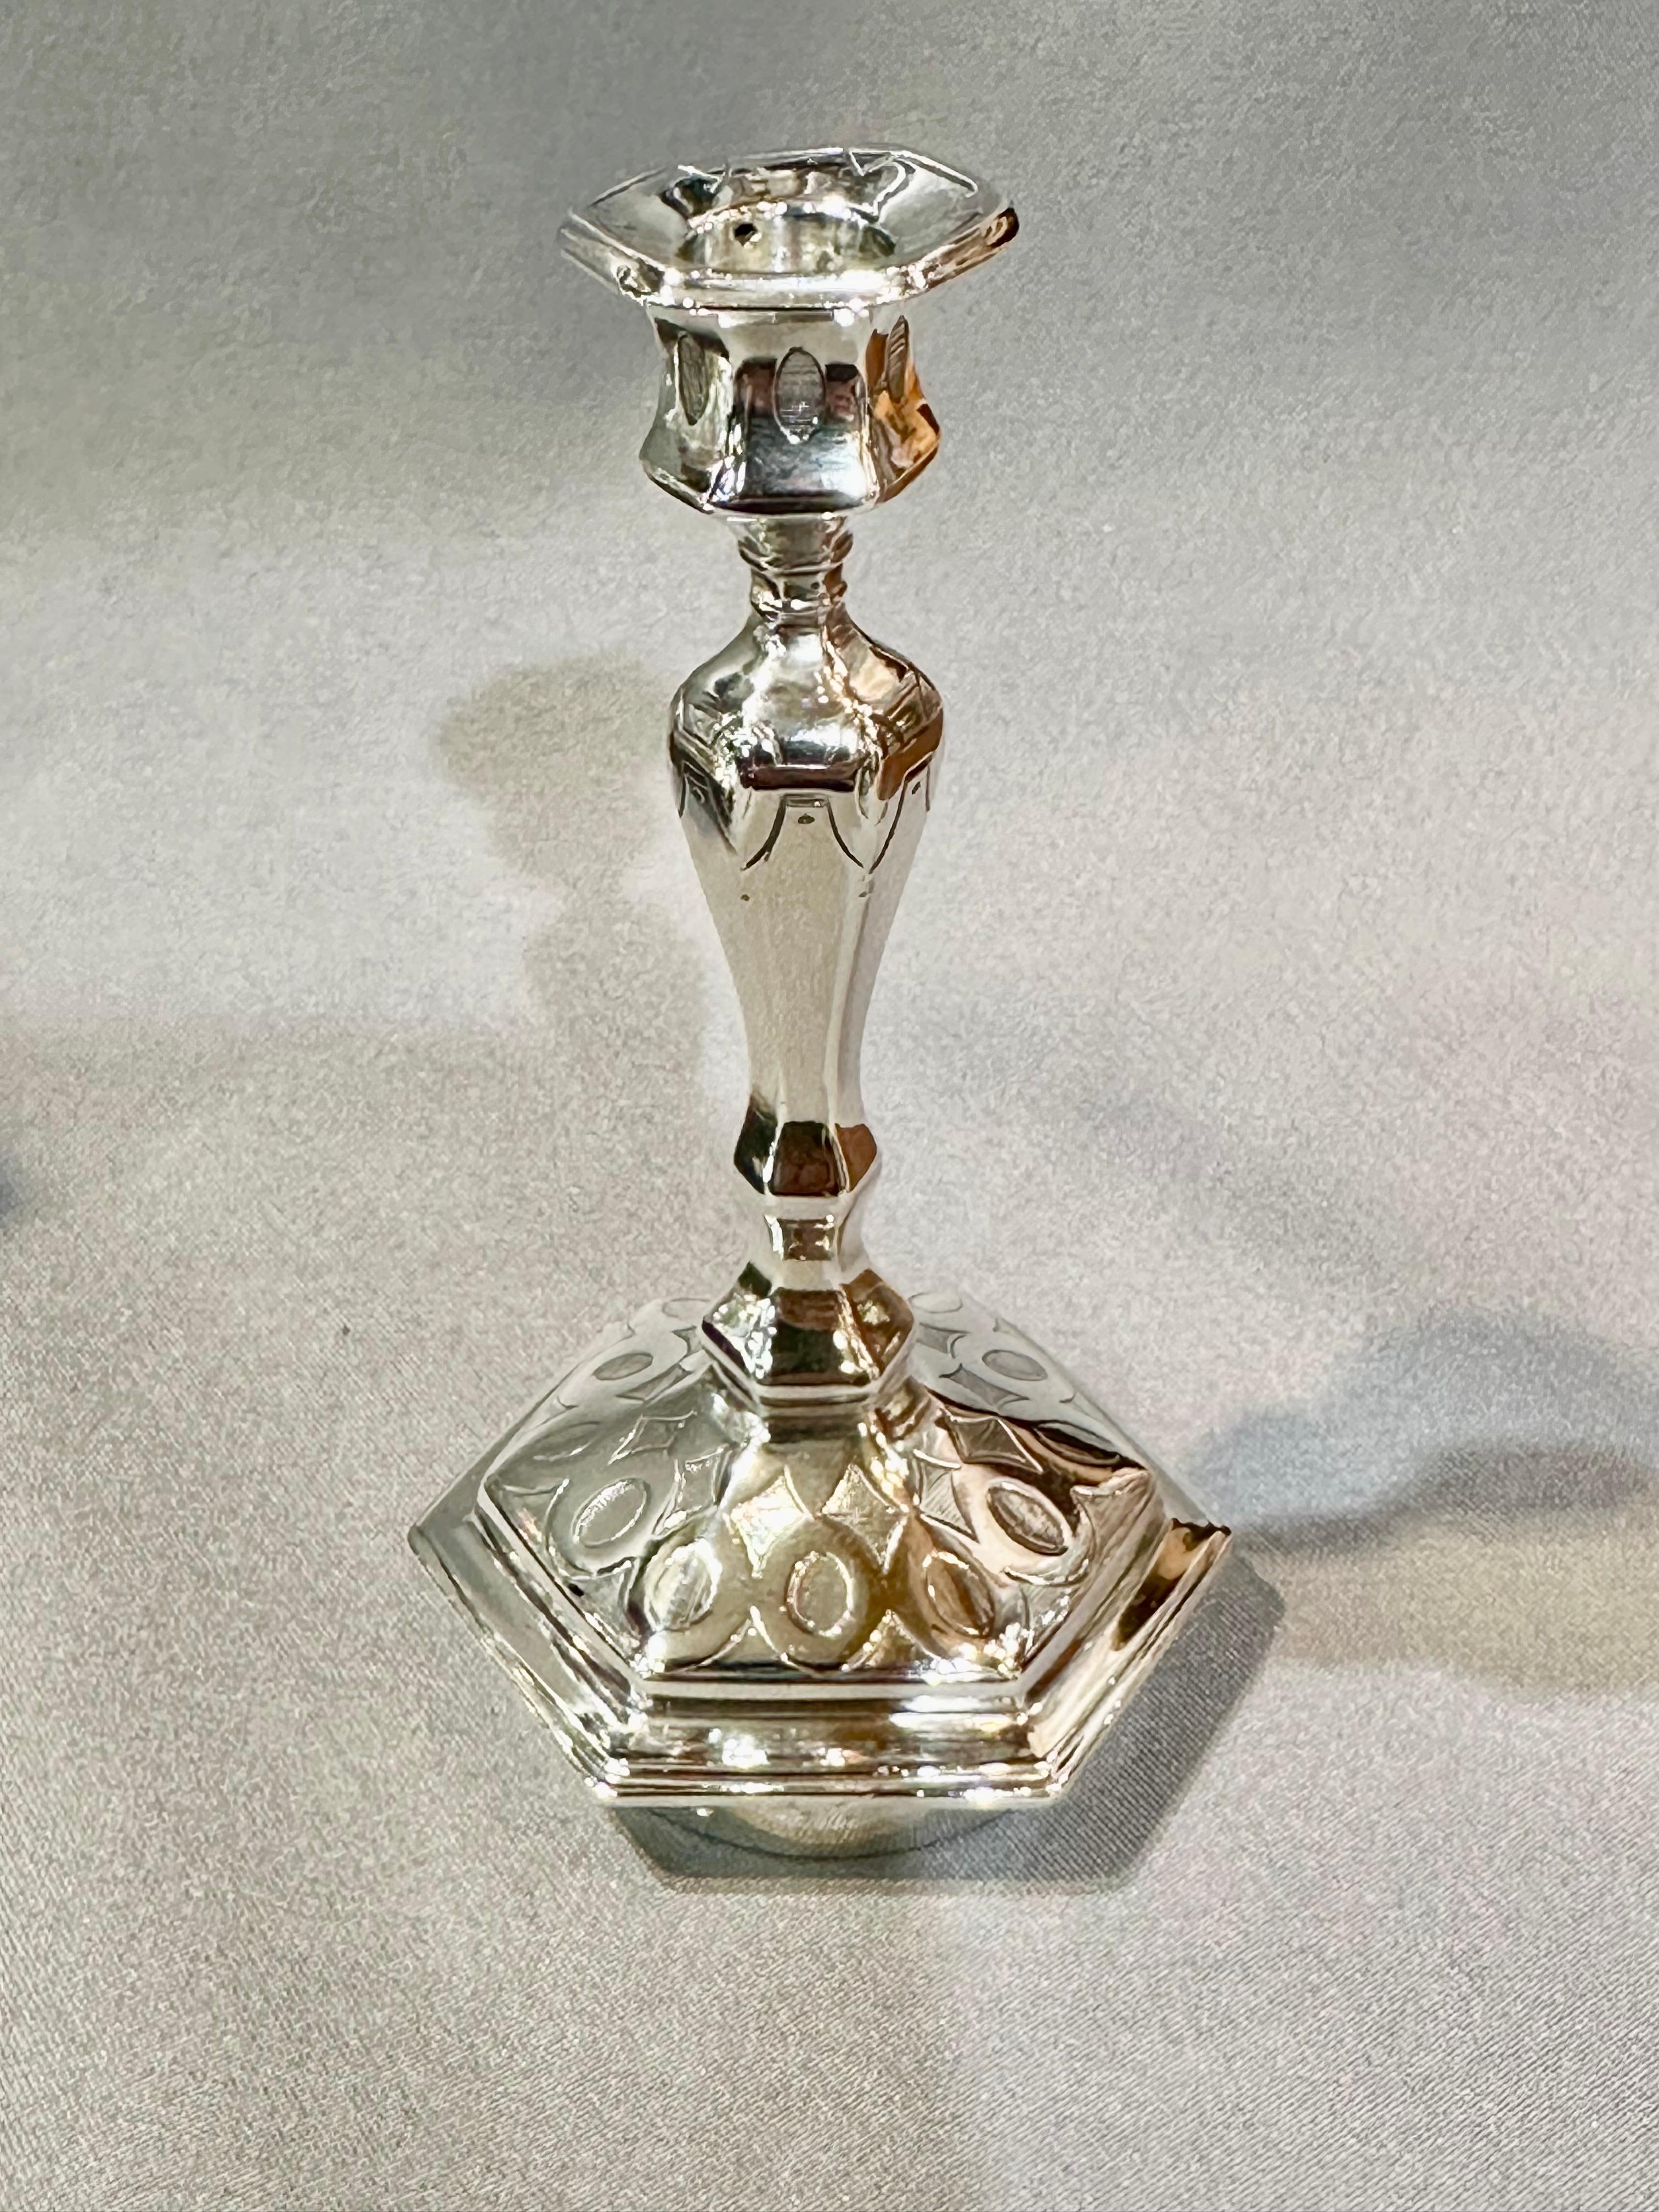 Edwardian  George Richards & Edward Brown English Sterling Silver Glass Inkstand 1862 For Sale